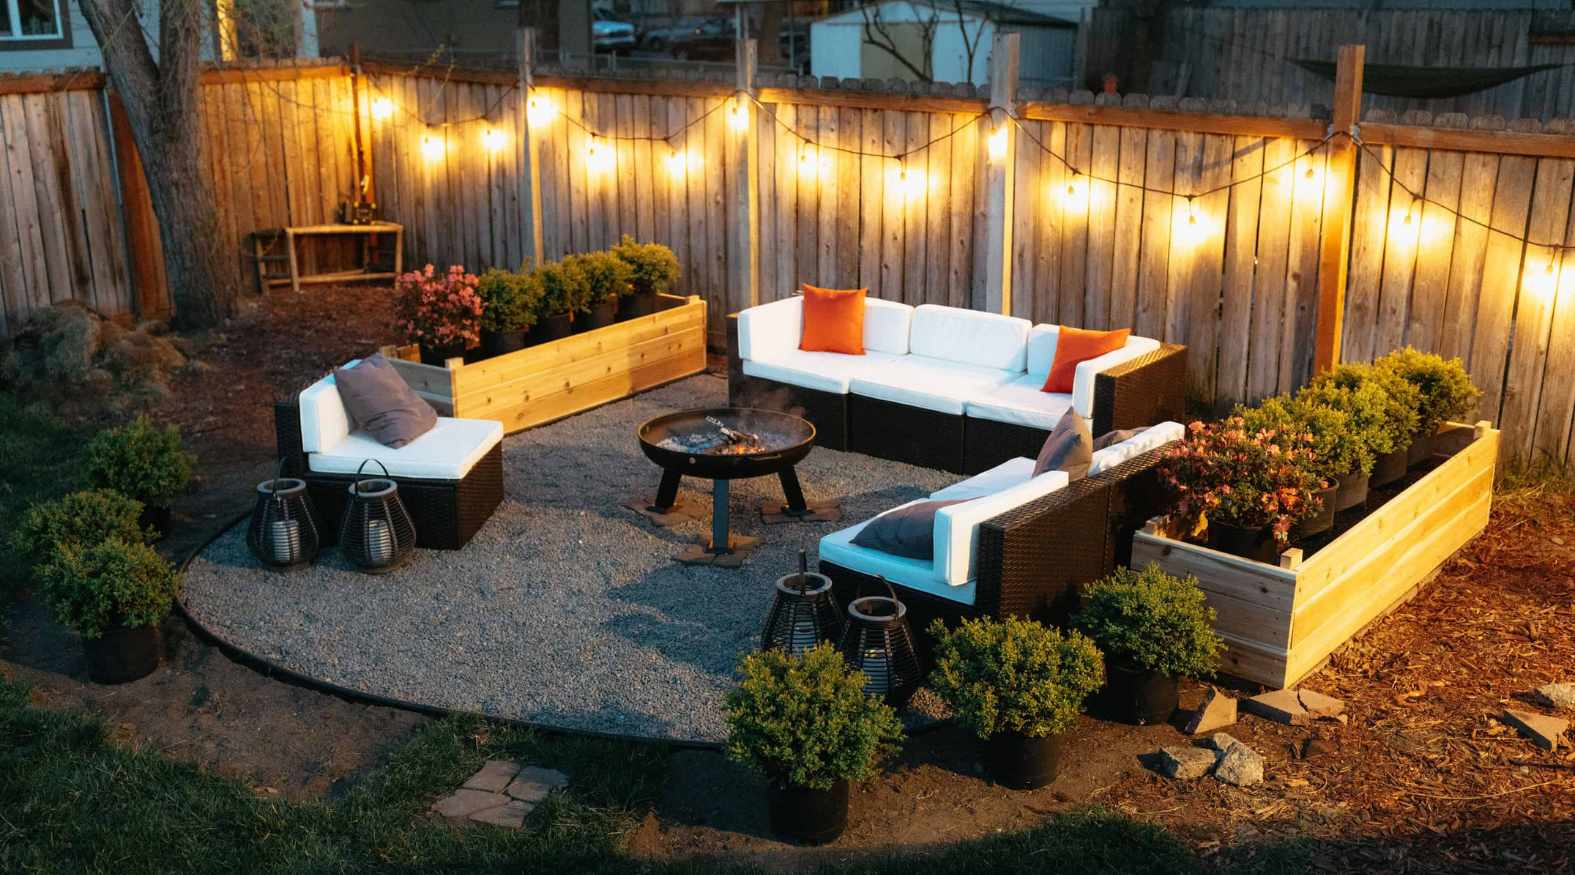 How To Make A Gravel Fire Pit Area